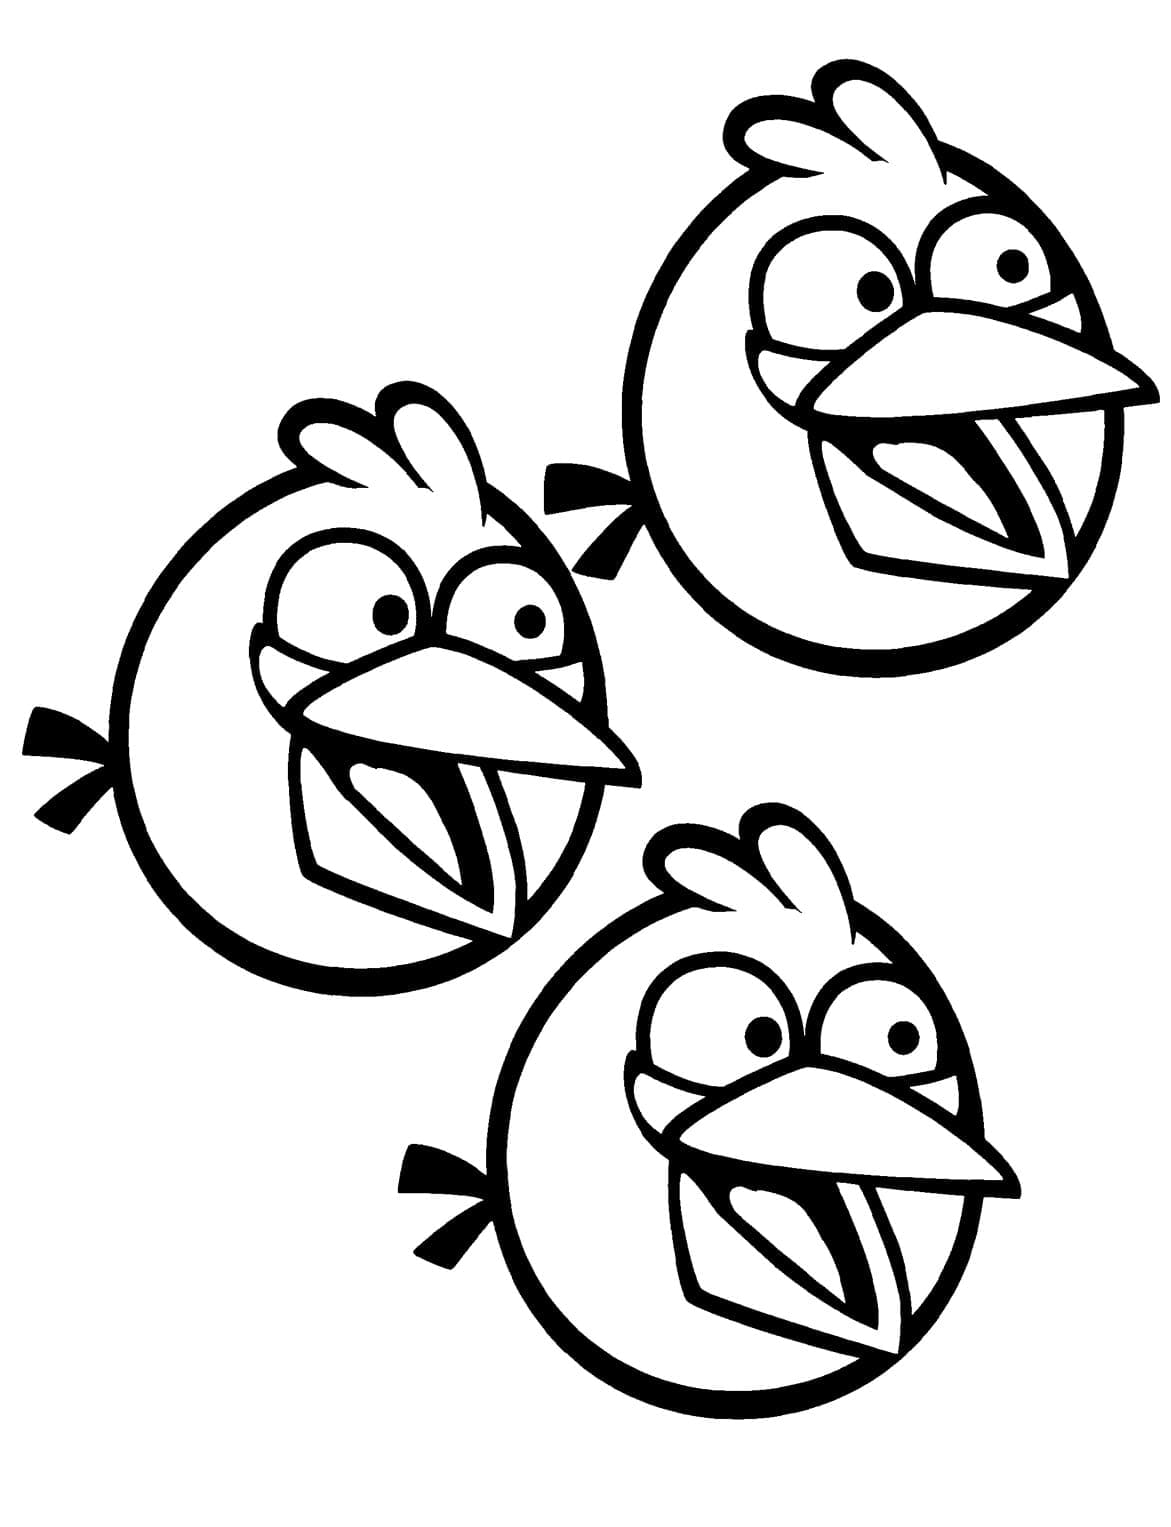 Angry Birds Blue Birds coloring page - Download, Print or Color Online ...